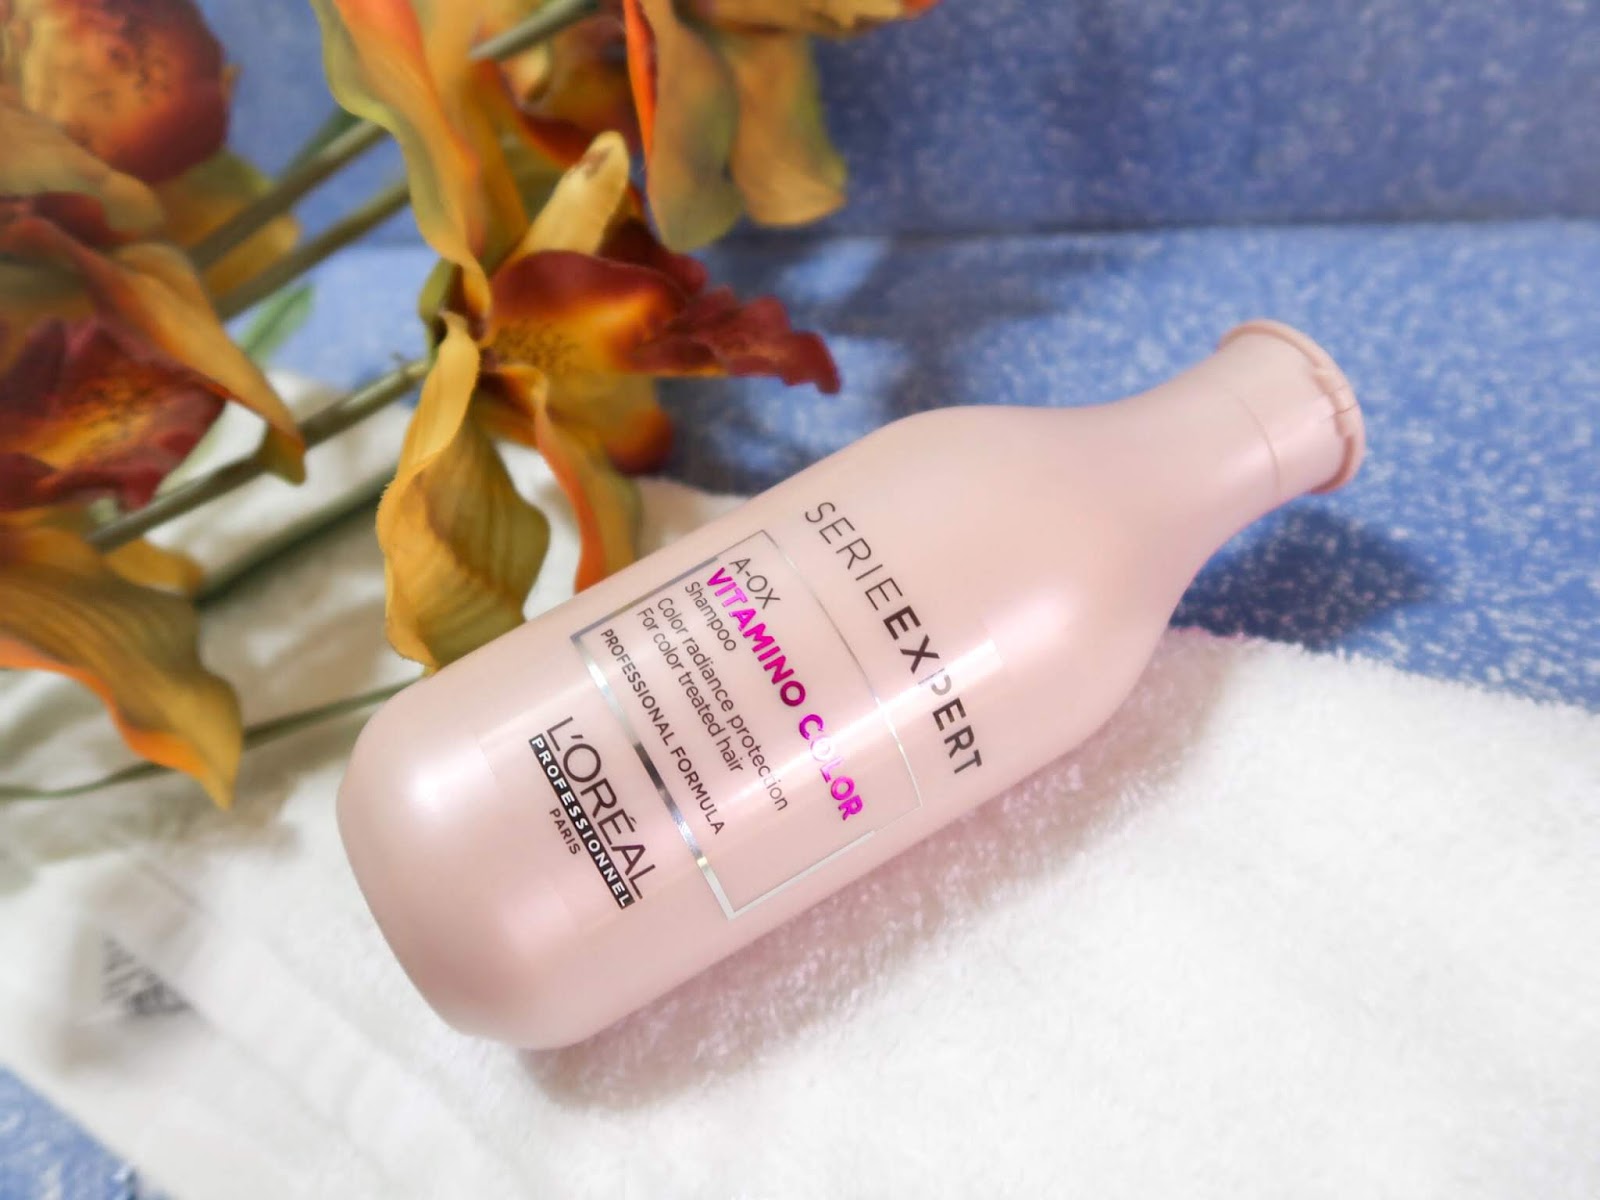 Shampoo for Coloured Hair! – L'Oréal Professionnel Vitamino Color Shampoo  Review - The Pretty City Girl | Indian Travel & Lifestyle Blog